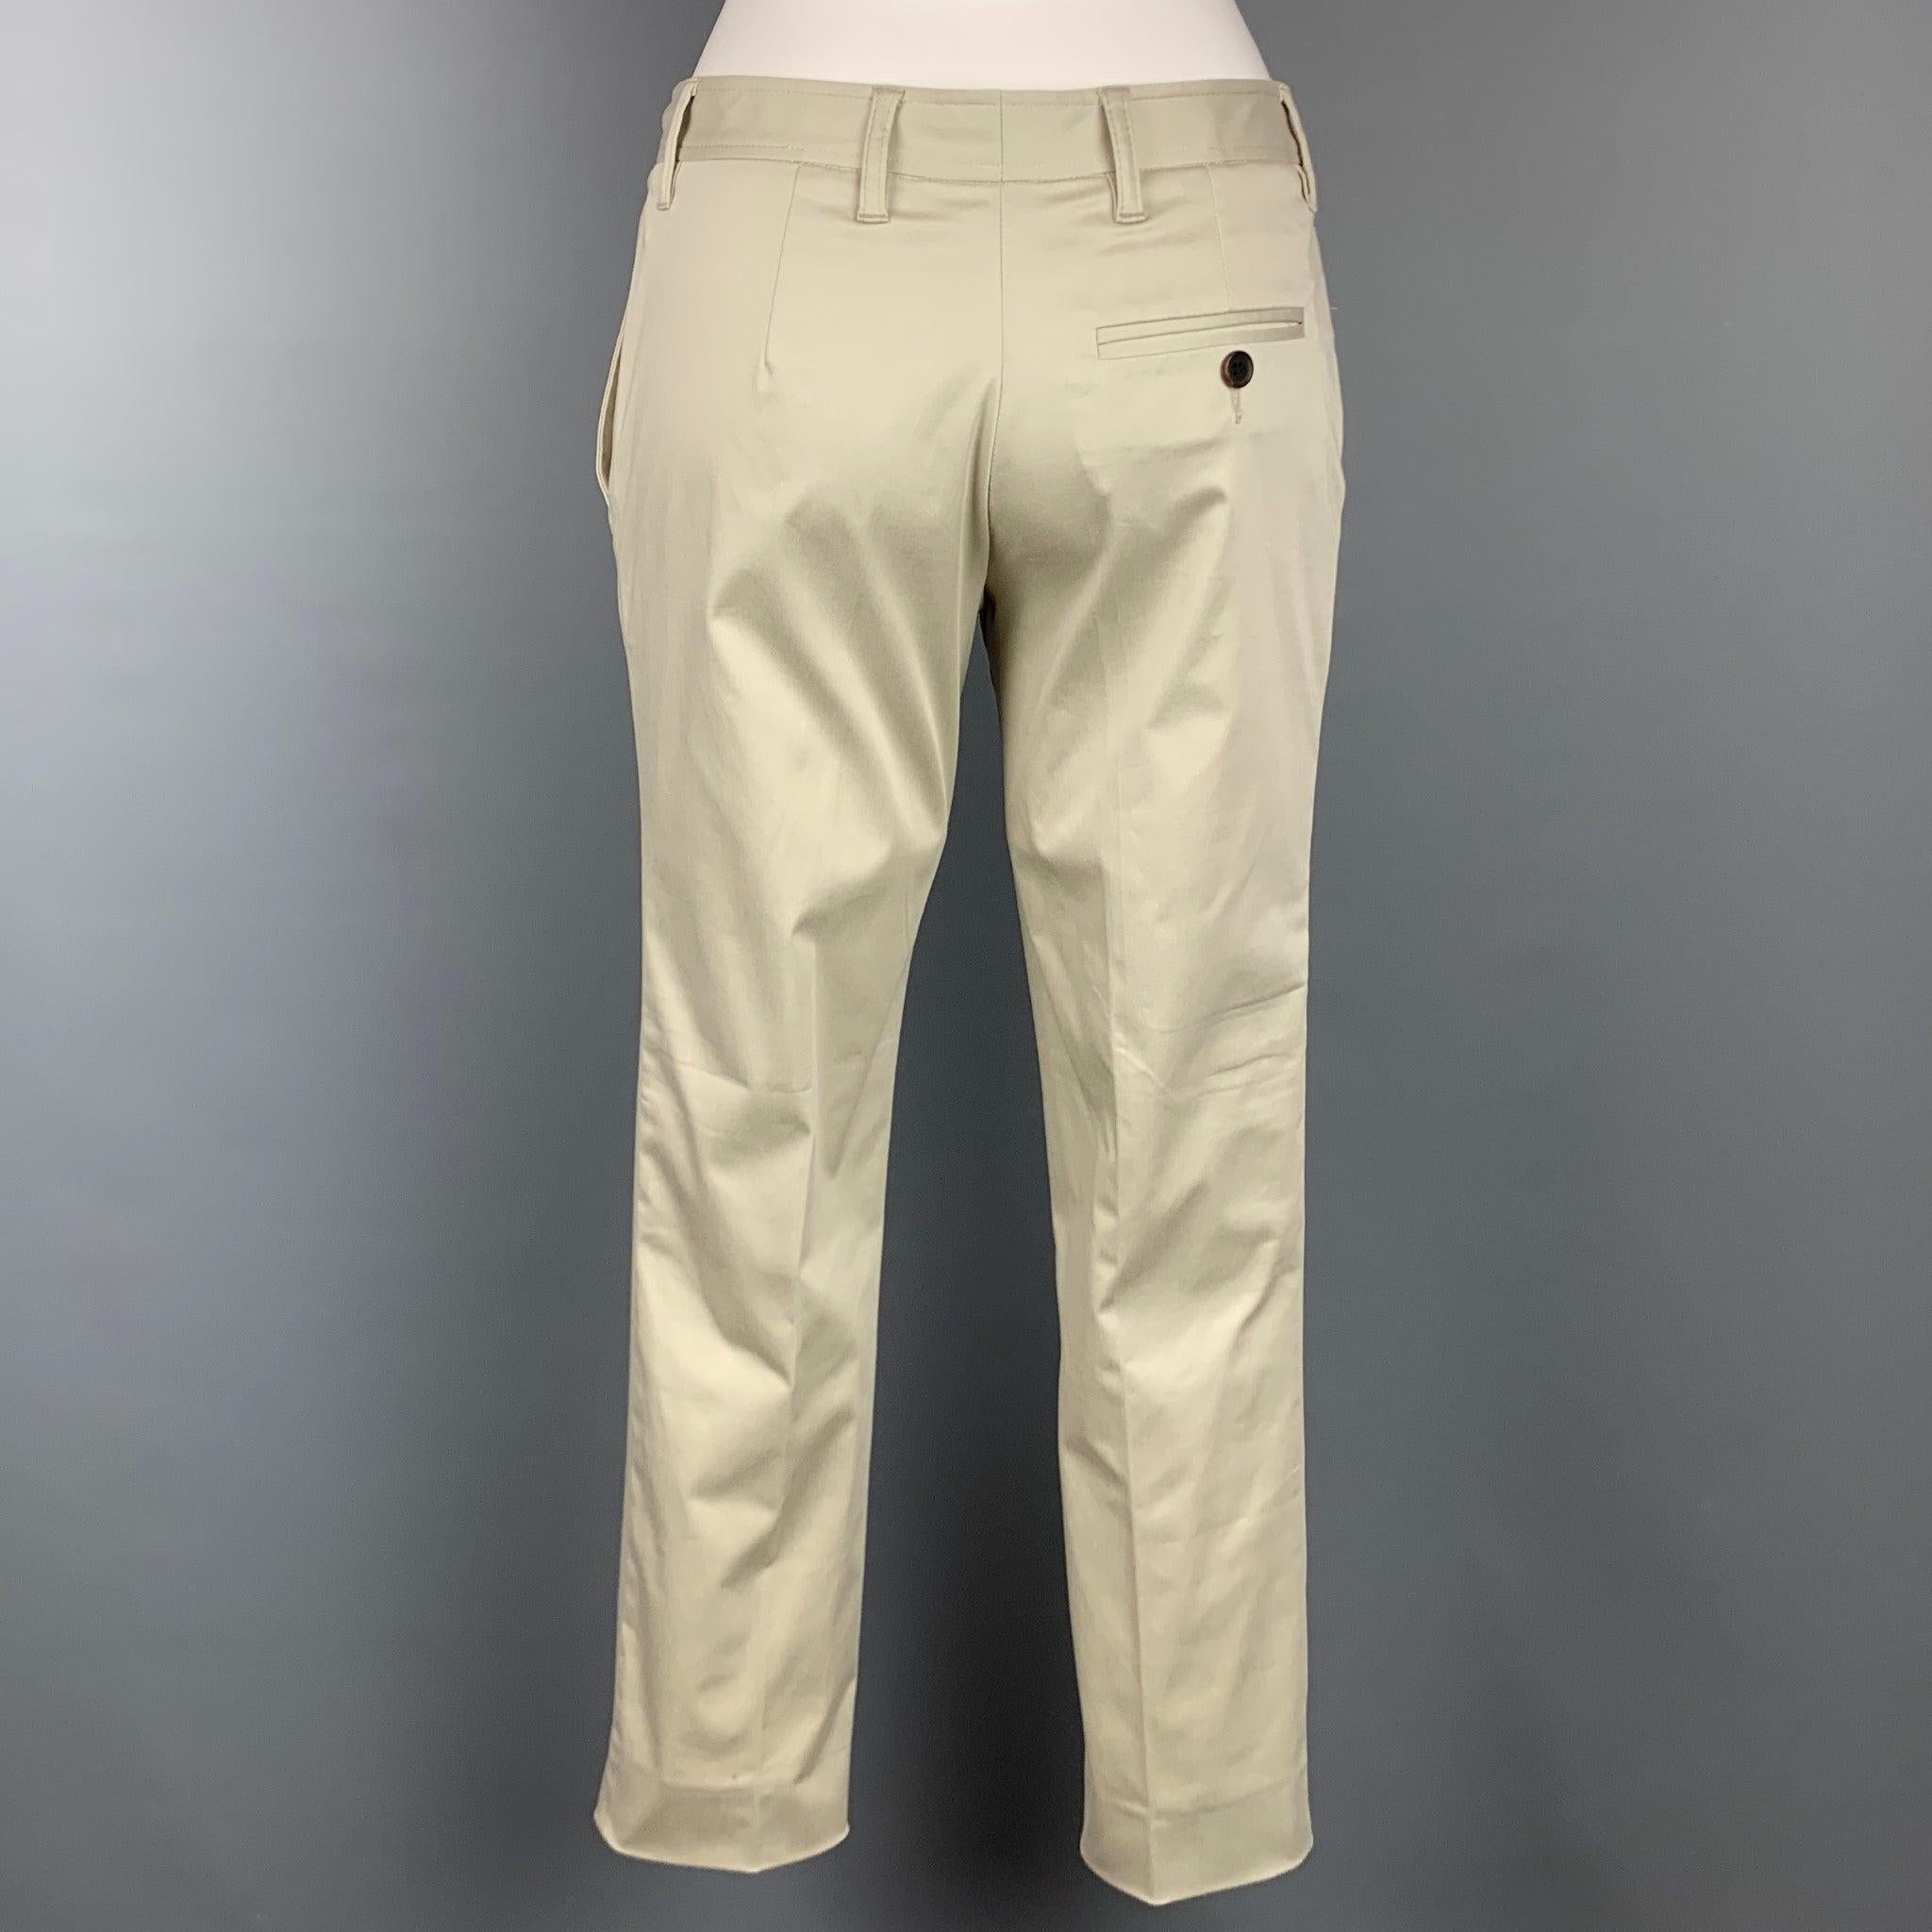 MIU MIU dress pants comes in a beige cotton featuring a narrow leg, front tab, and a zip fly closure. Made in Italy. Good
Pre-Owned Condition. 

Marked:   Missing tag.  

Measurements: 
  Waist: 29 inches  Rise: 8.5 inches  Inseam: 27 inches 
  
  
